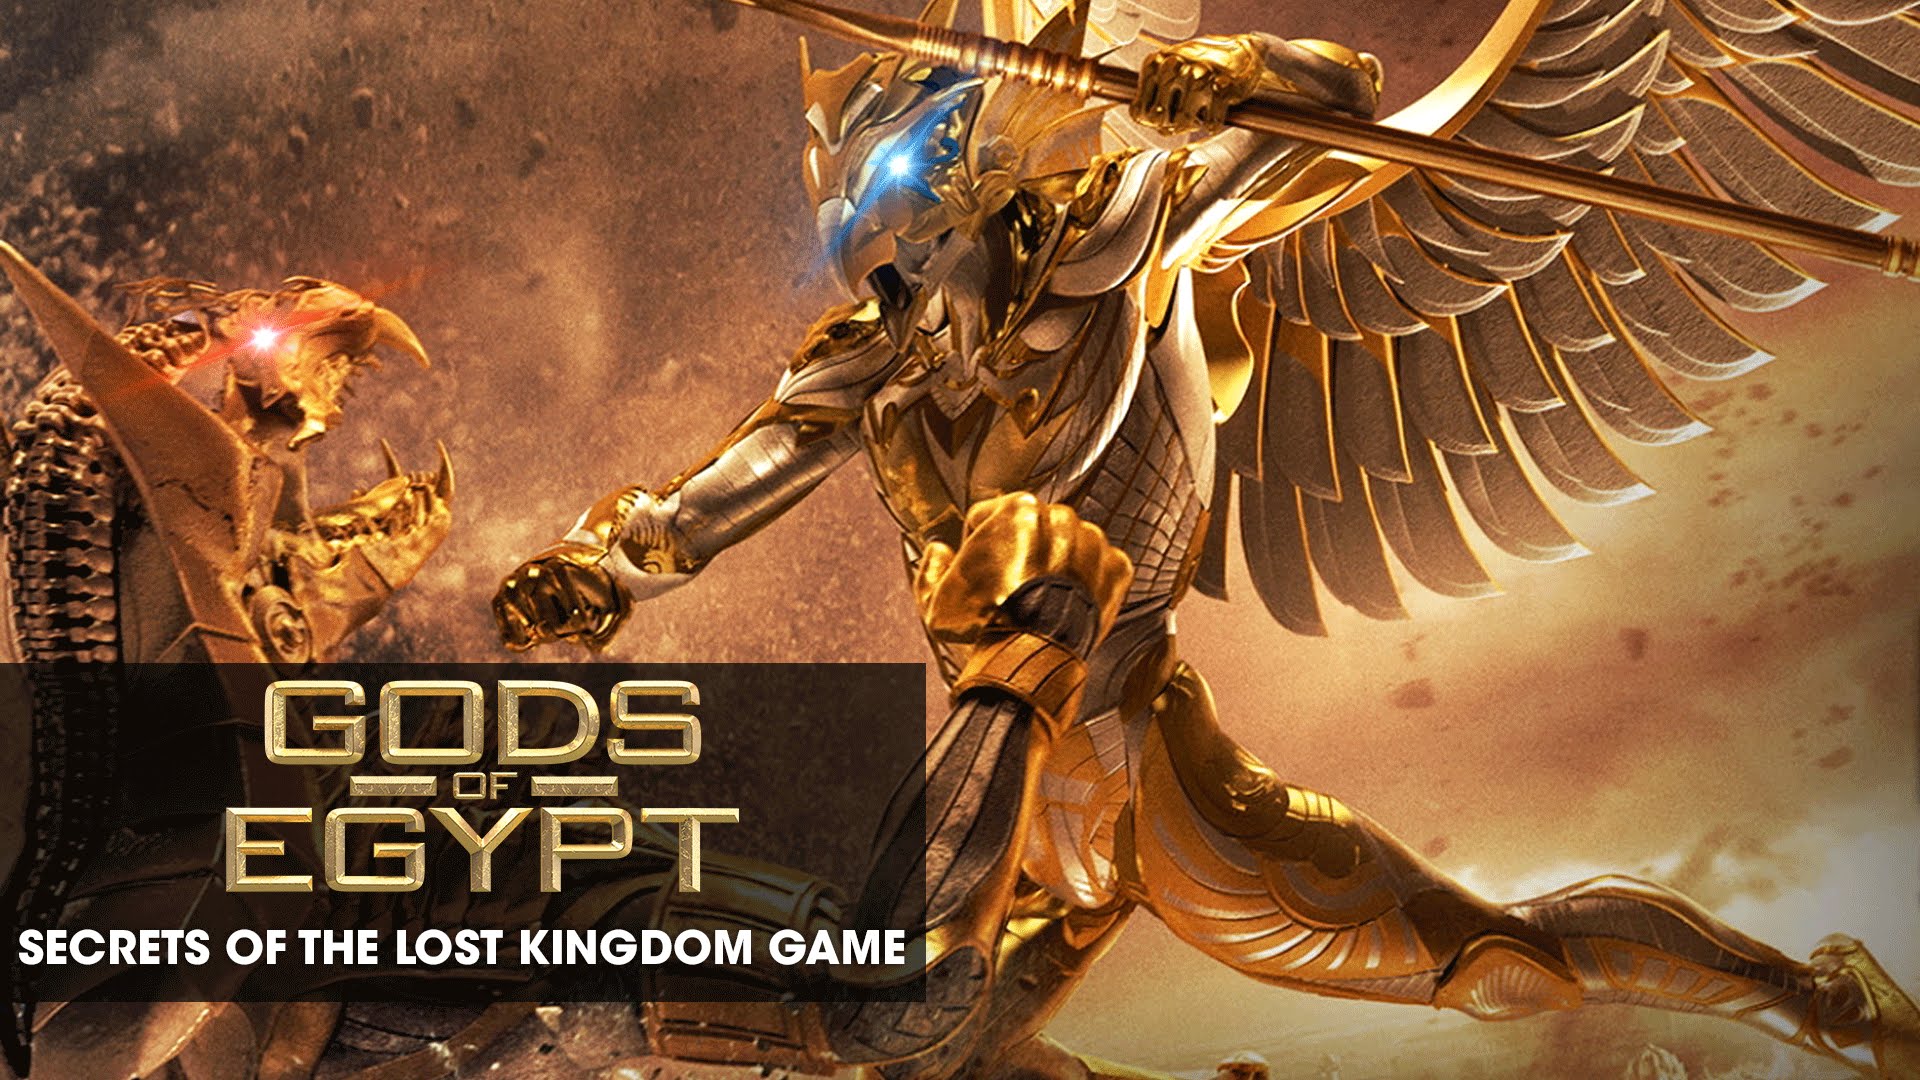 Gods Of Egypt: Secrets Of The Lost Kingdom Game